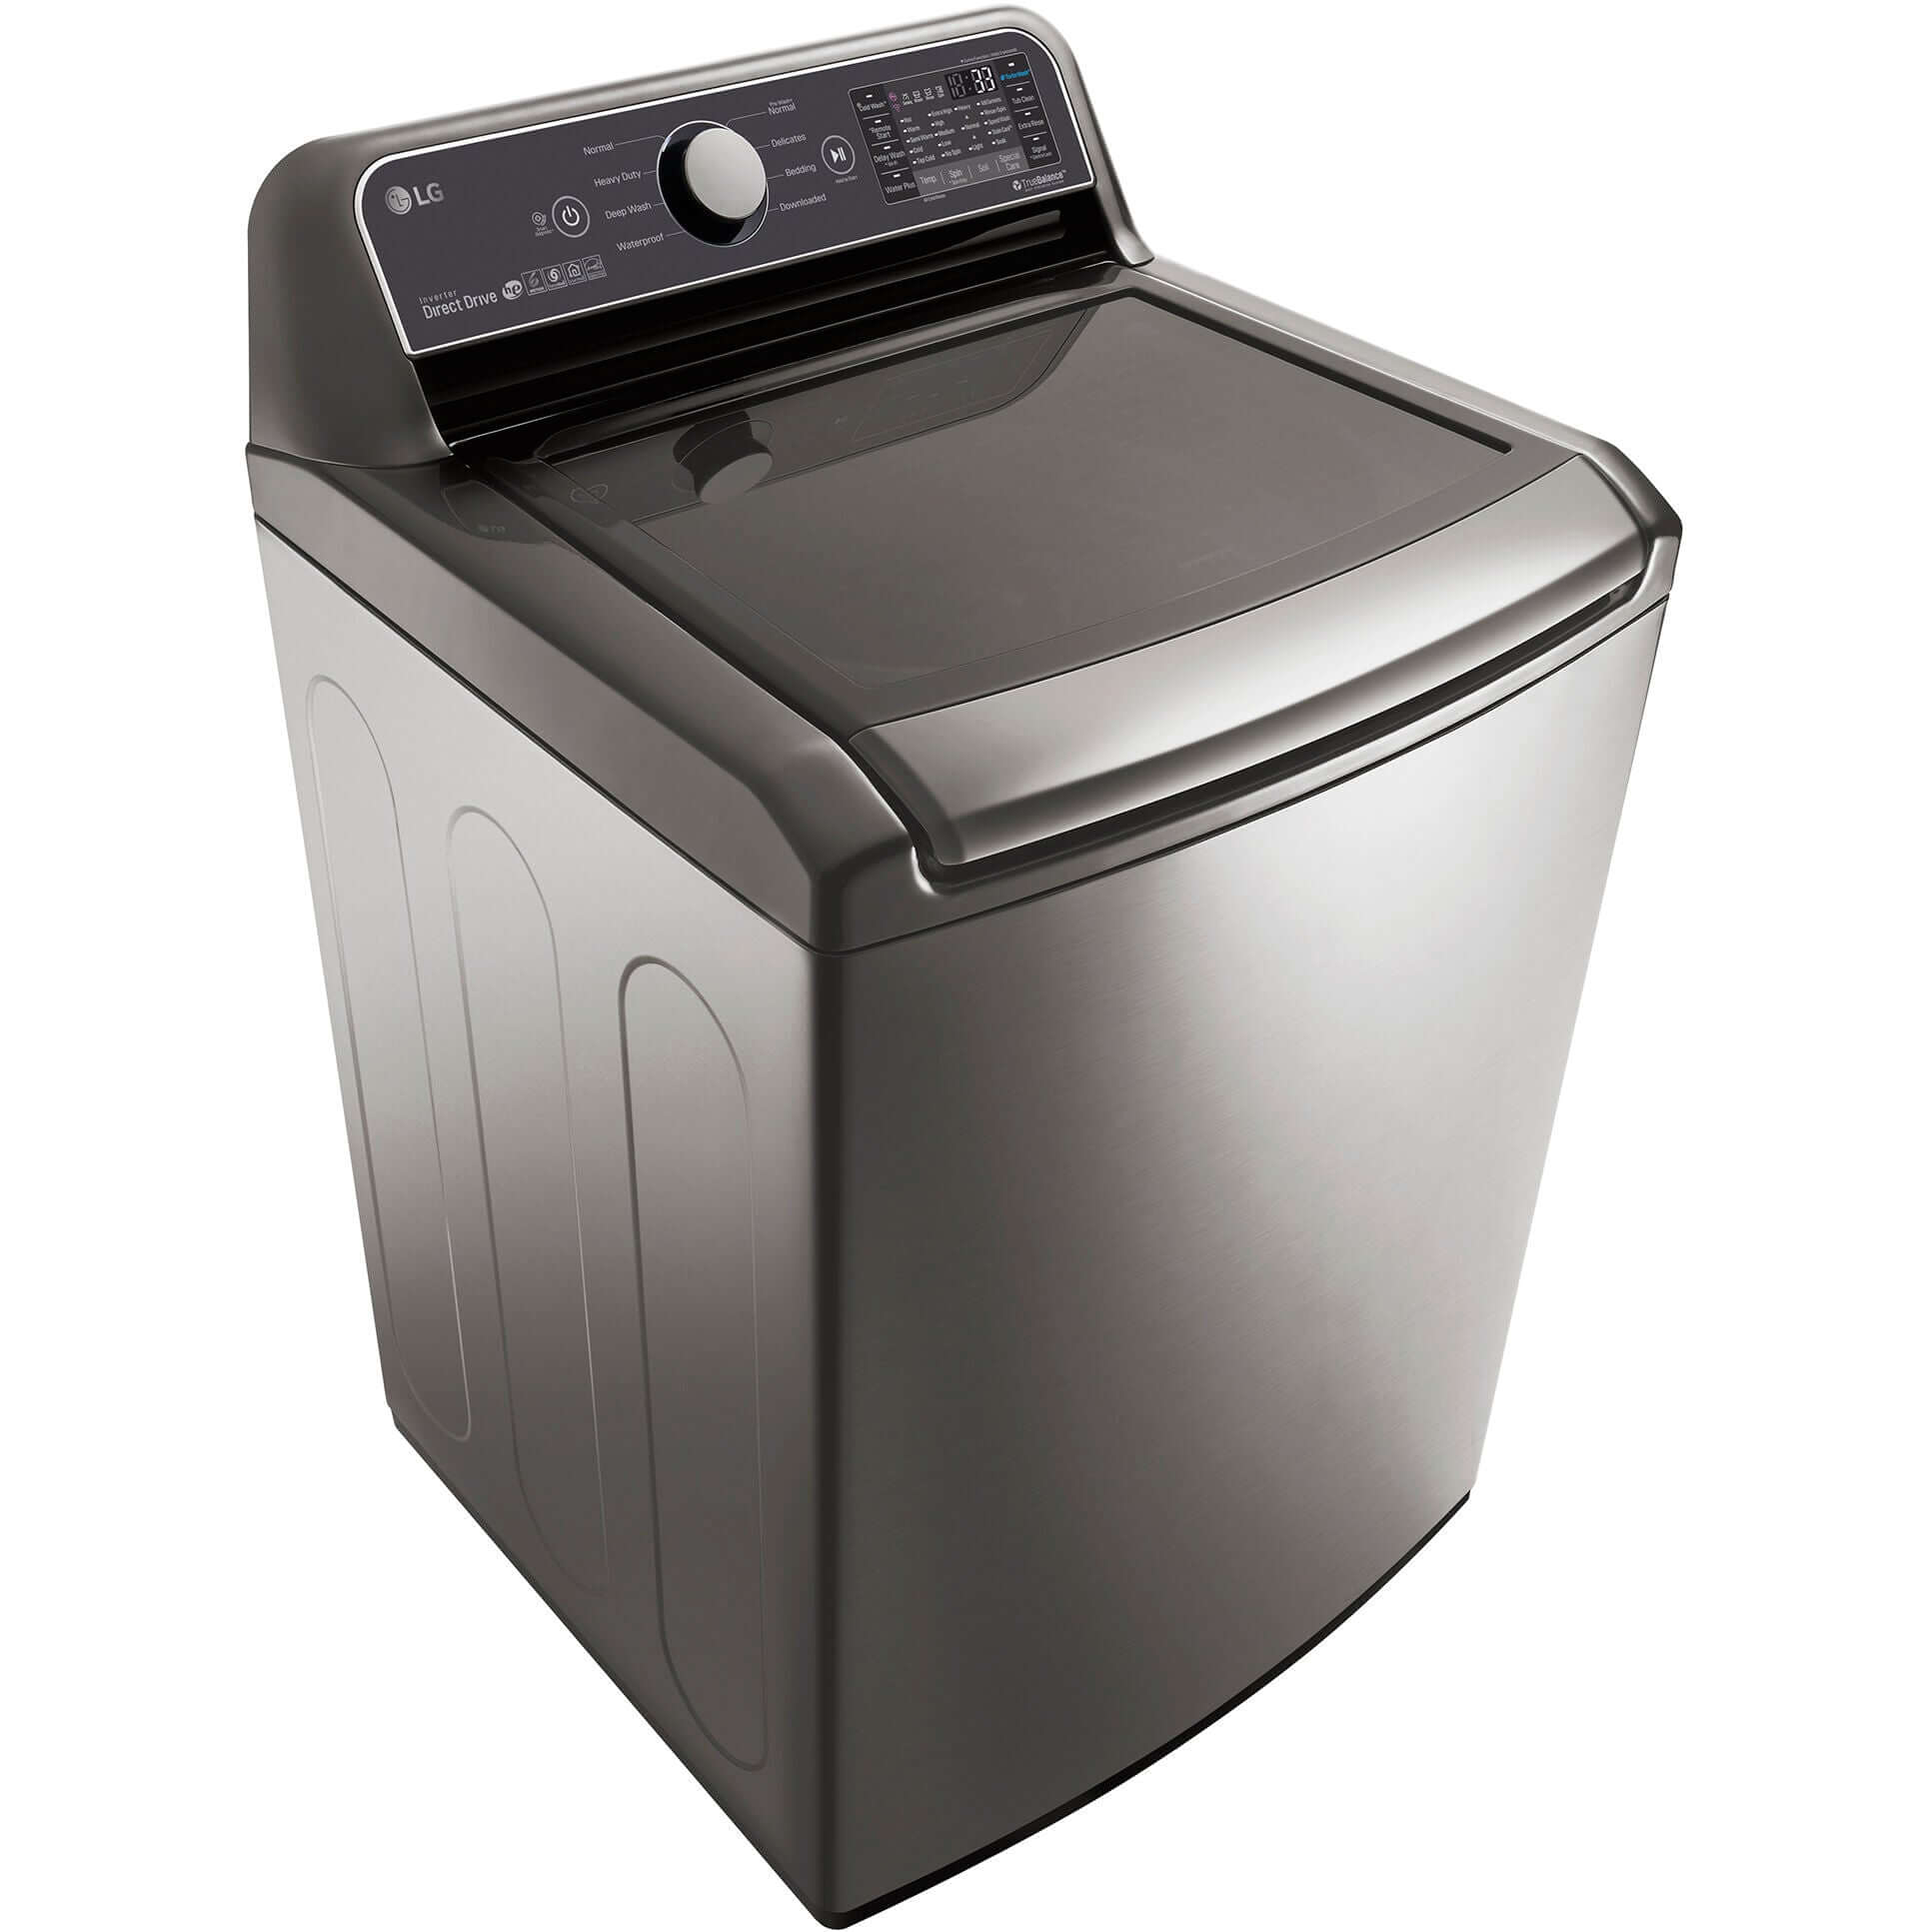 LG 27 Inch Top Load Washer with TurboWash in Graphite Steel 5 cu. ft. (WT7300CV)